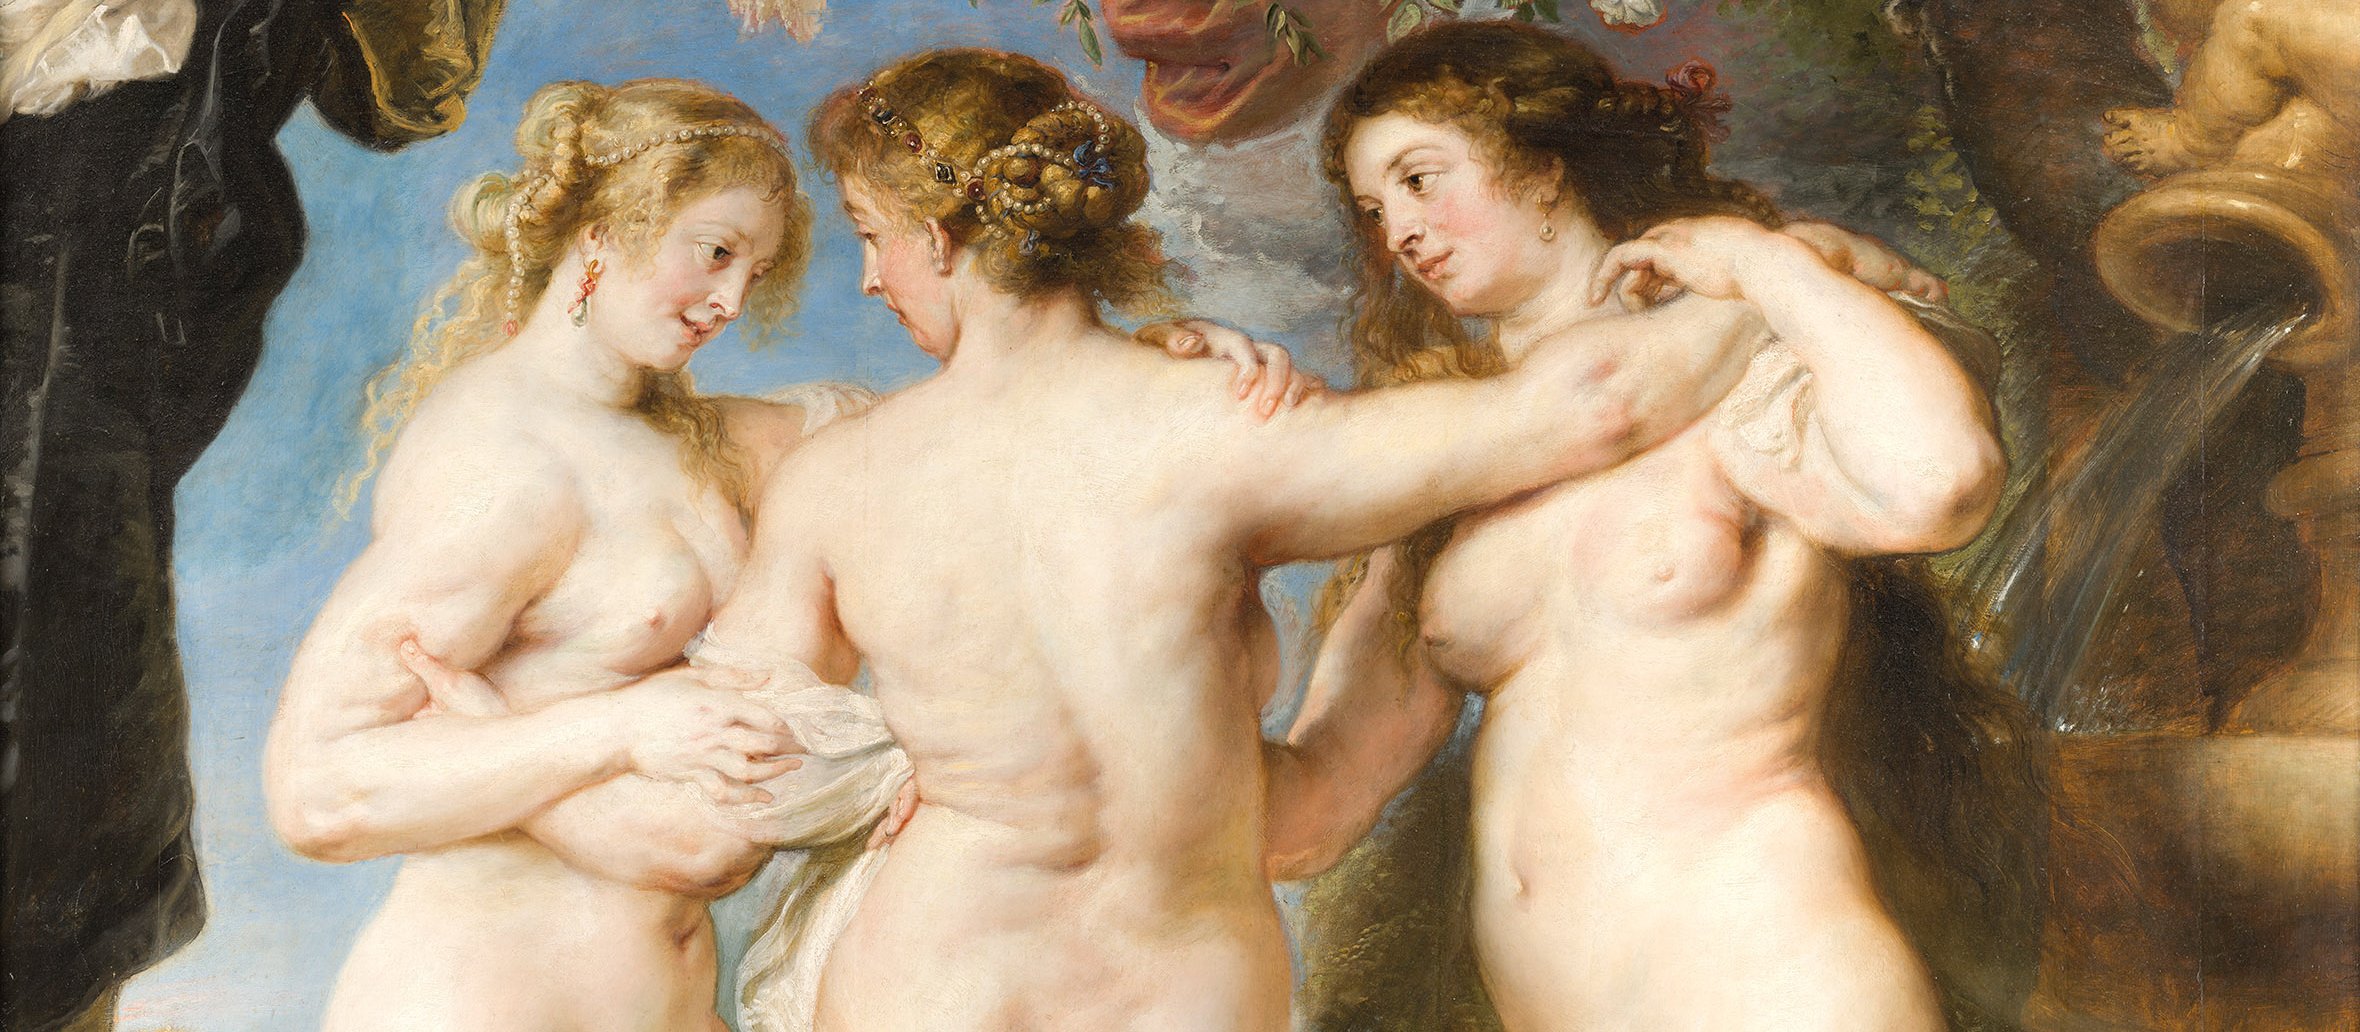 The Three Graces by Peter Paul Rubens – what do you notice about the right hand of the grace on the left?